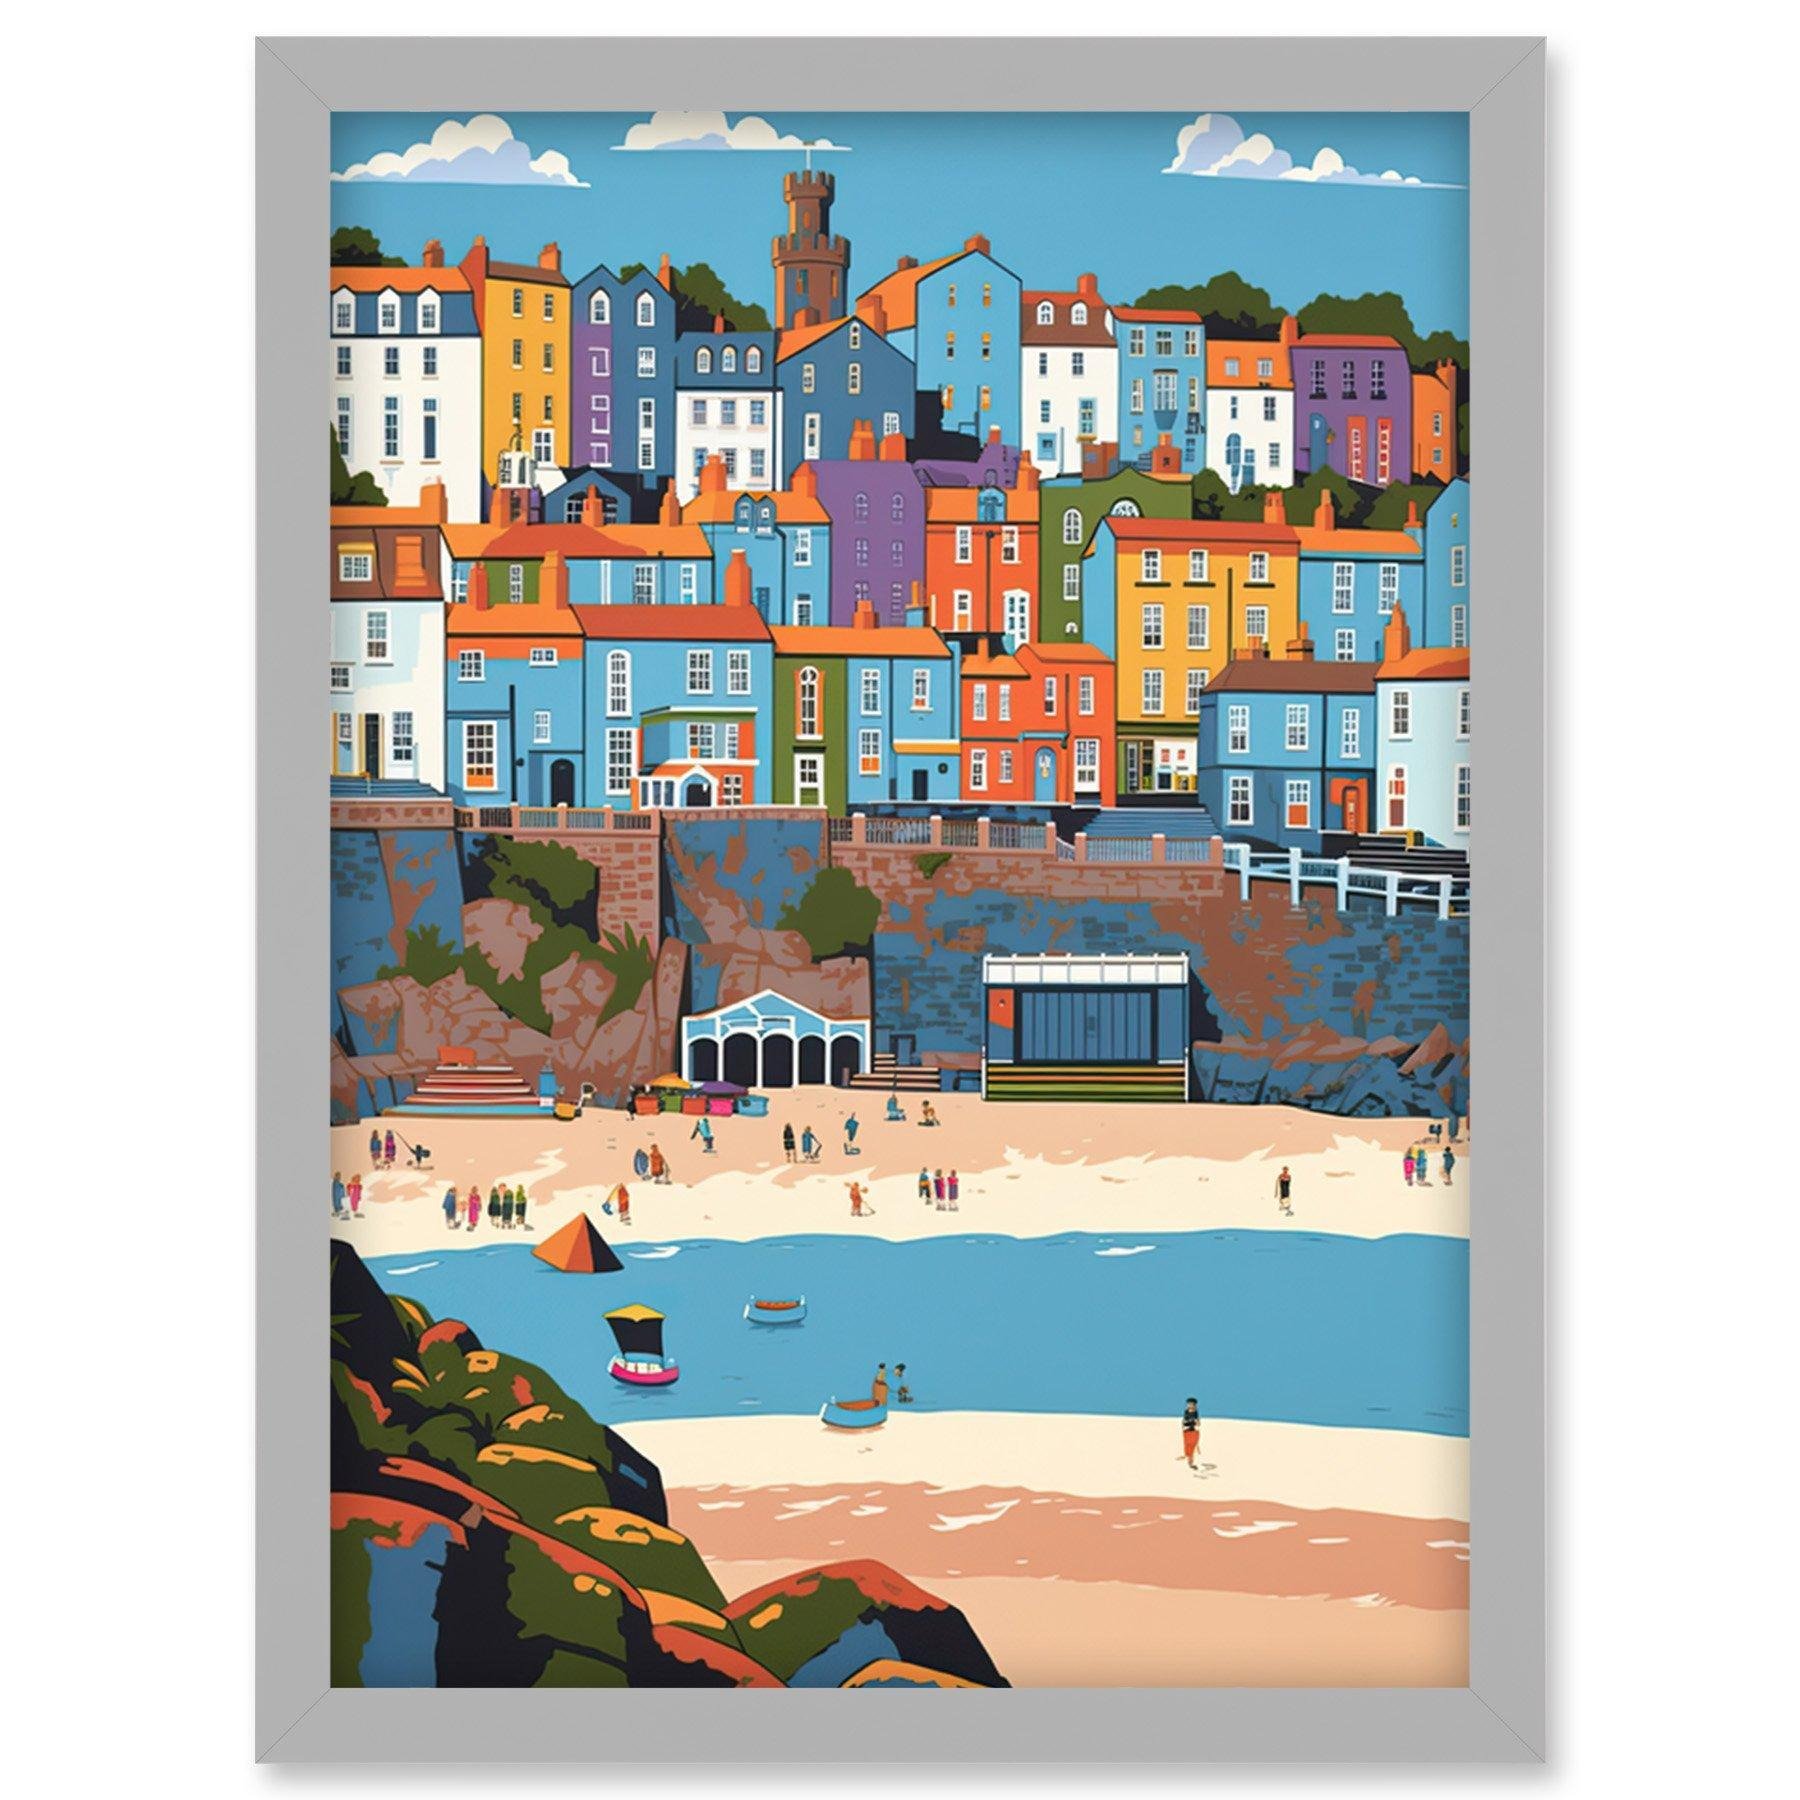 Tenby Castle Beach in Wales Colourful Townscape Artwork Framed Wall Art Print A4 - image 1